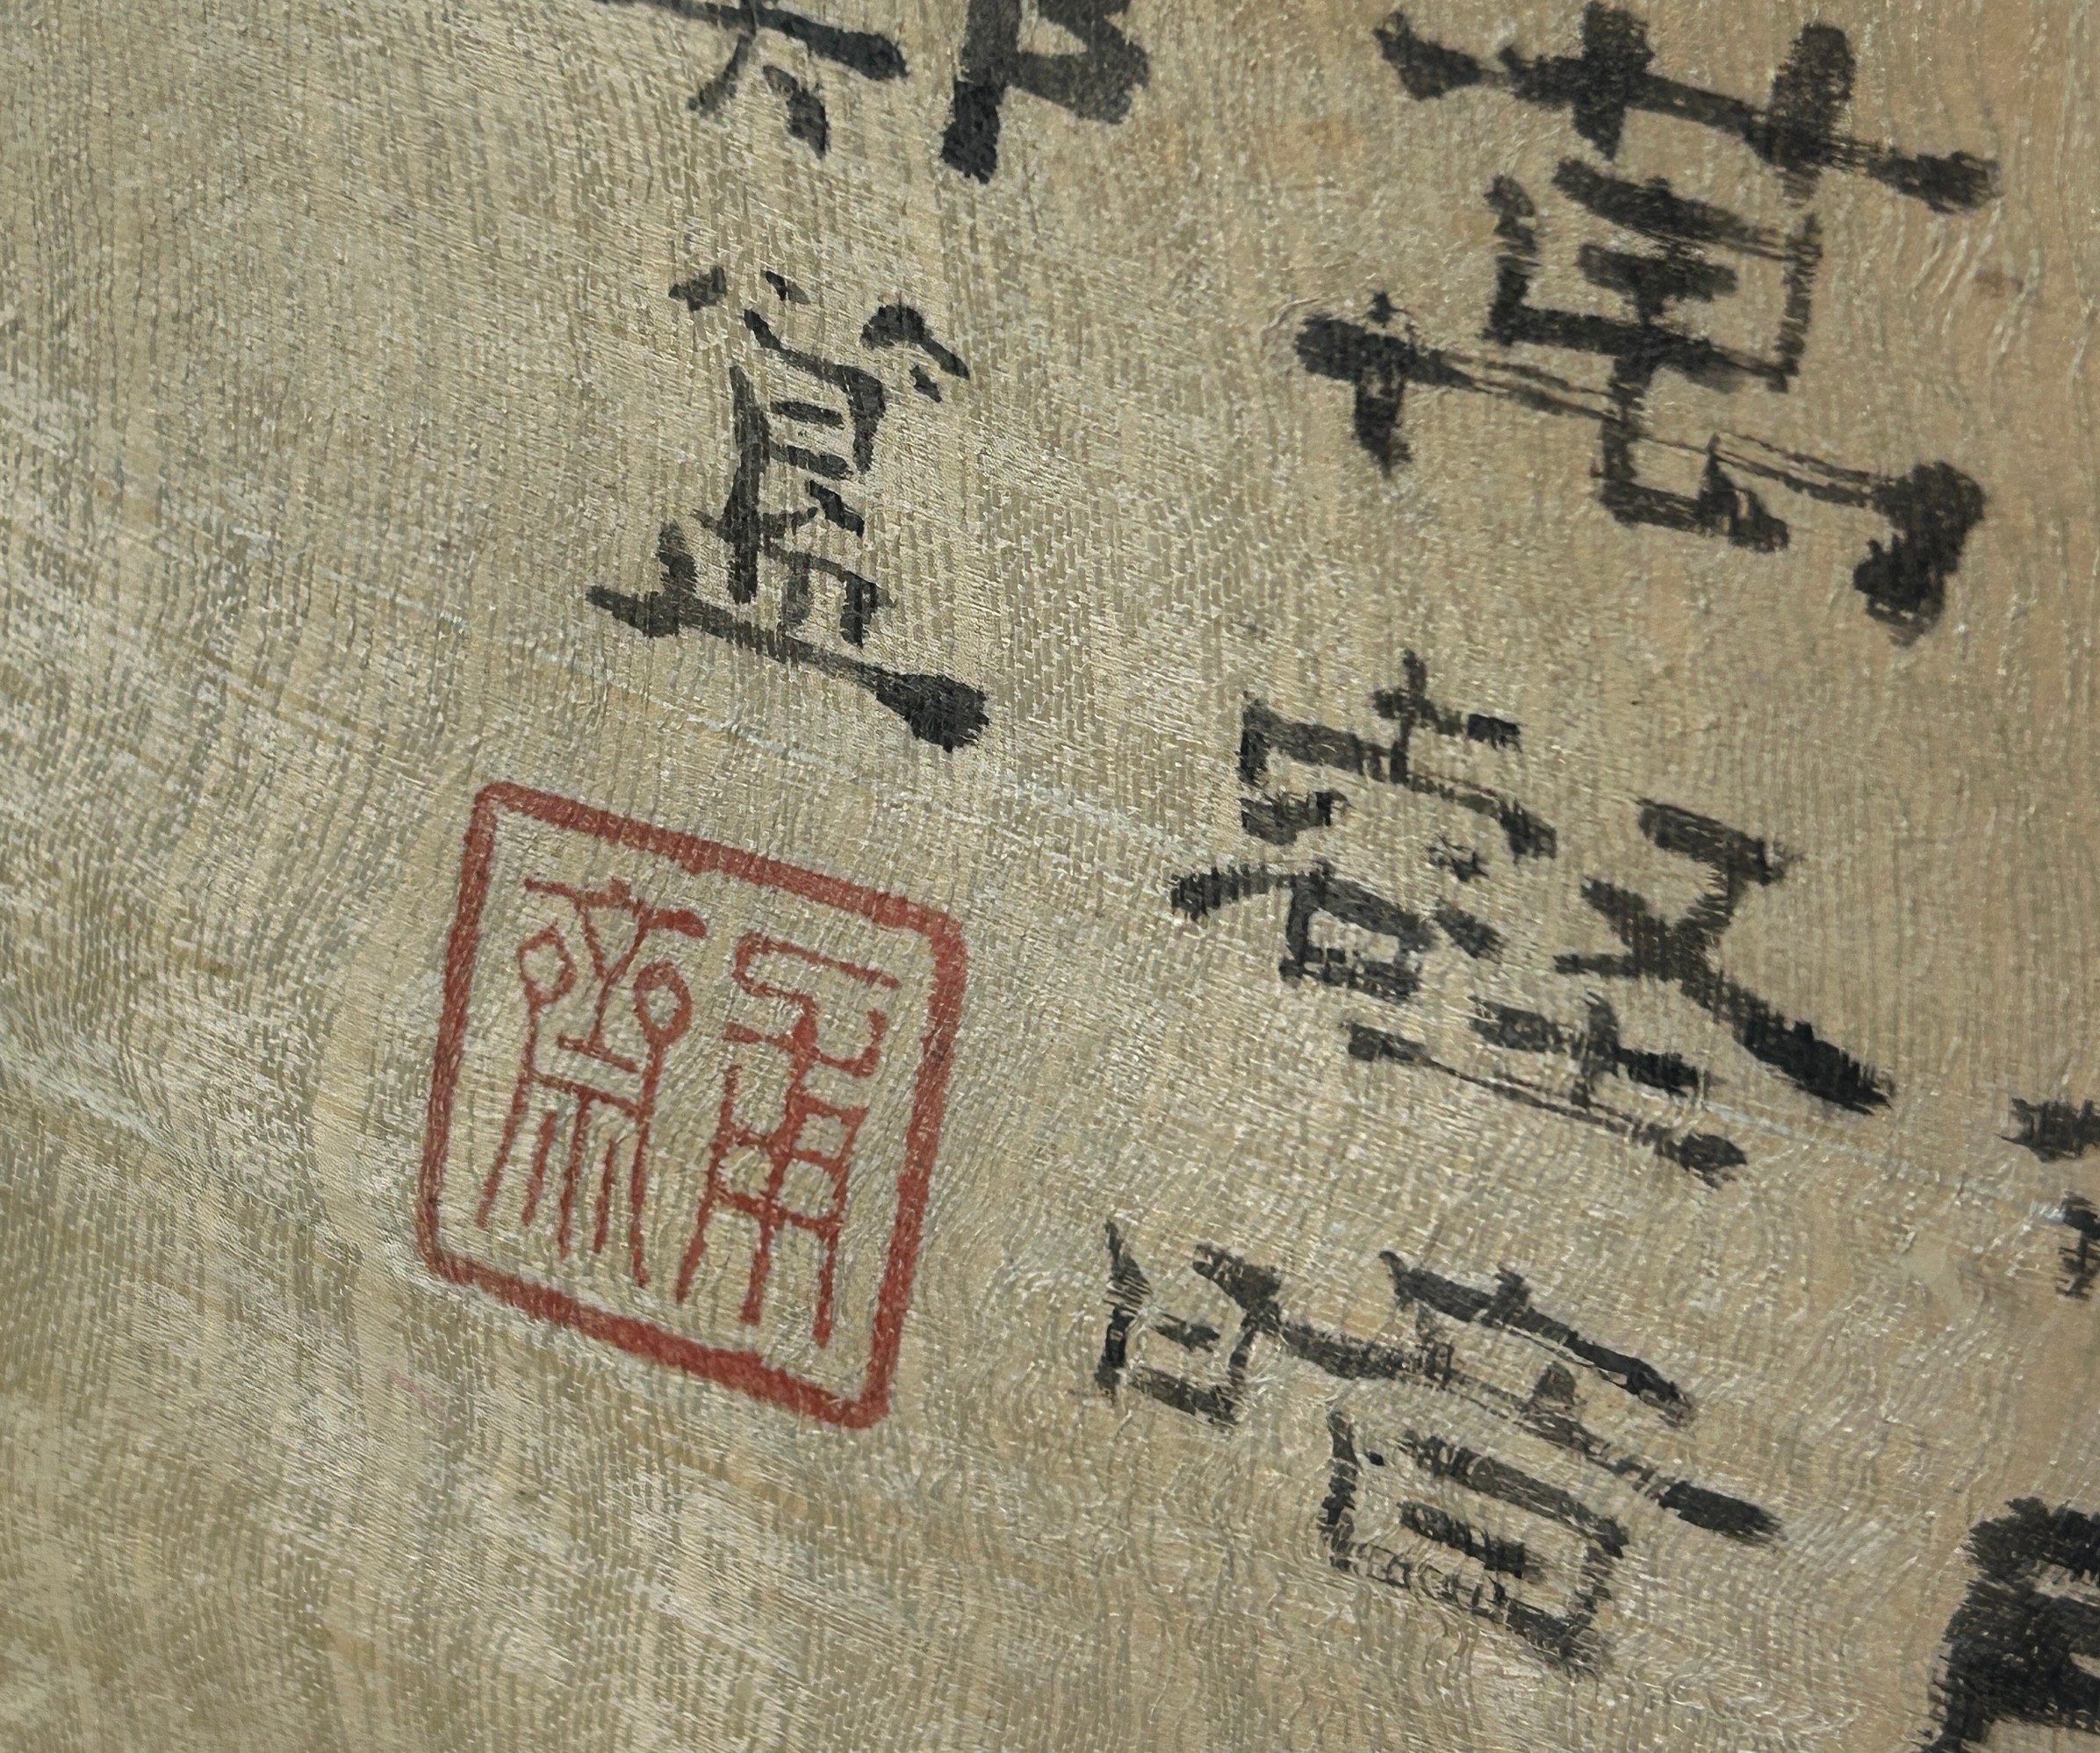 AFTER SU SHI (SU DONGPO) (1037-1101) : A PAINTING ON SCROLL DEPICTING BAMBOO STALKS WITH WRITING - Image 12 of 17